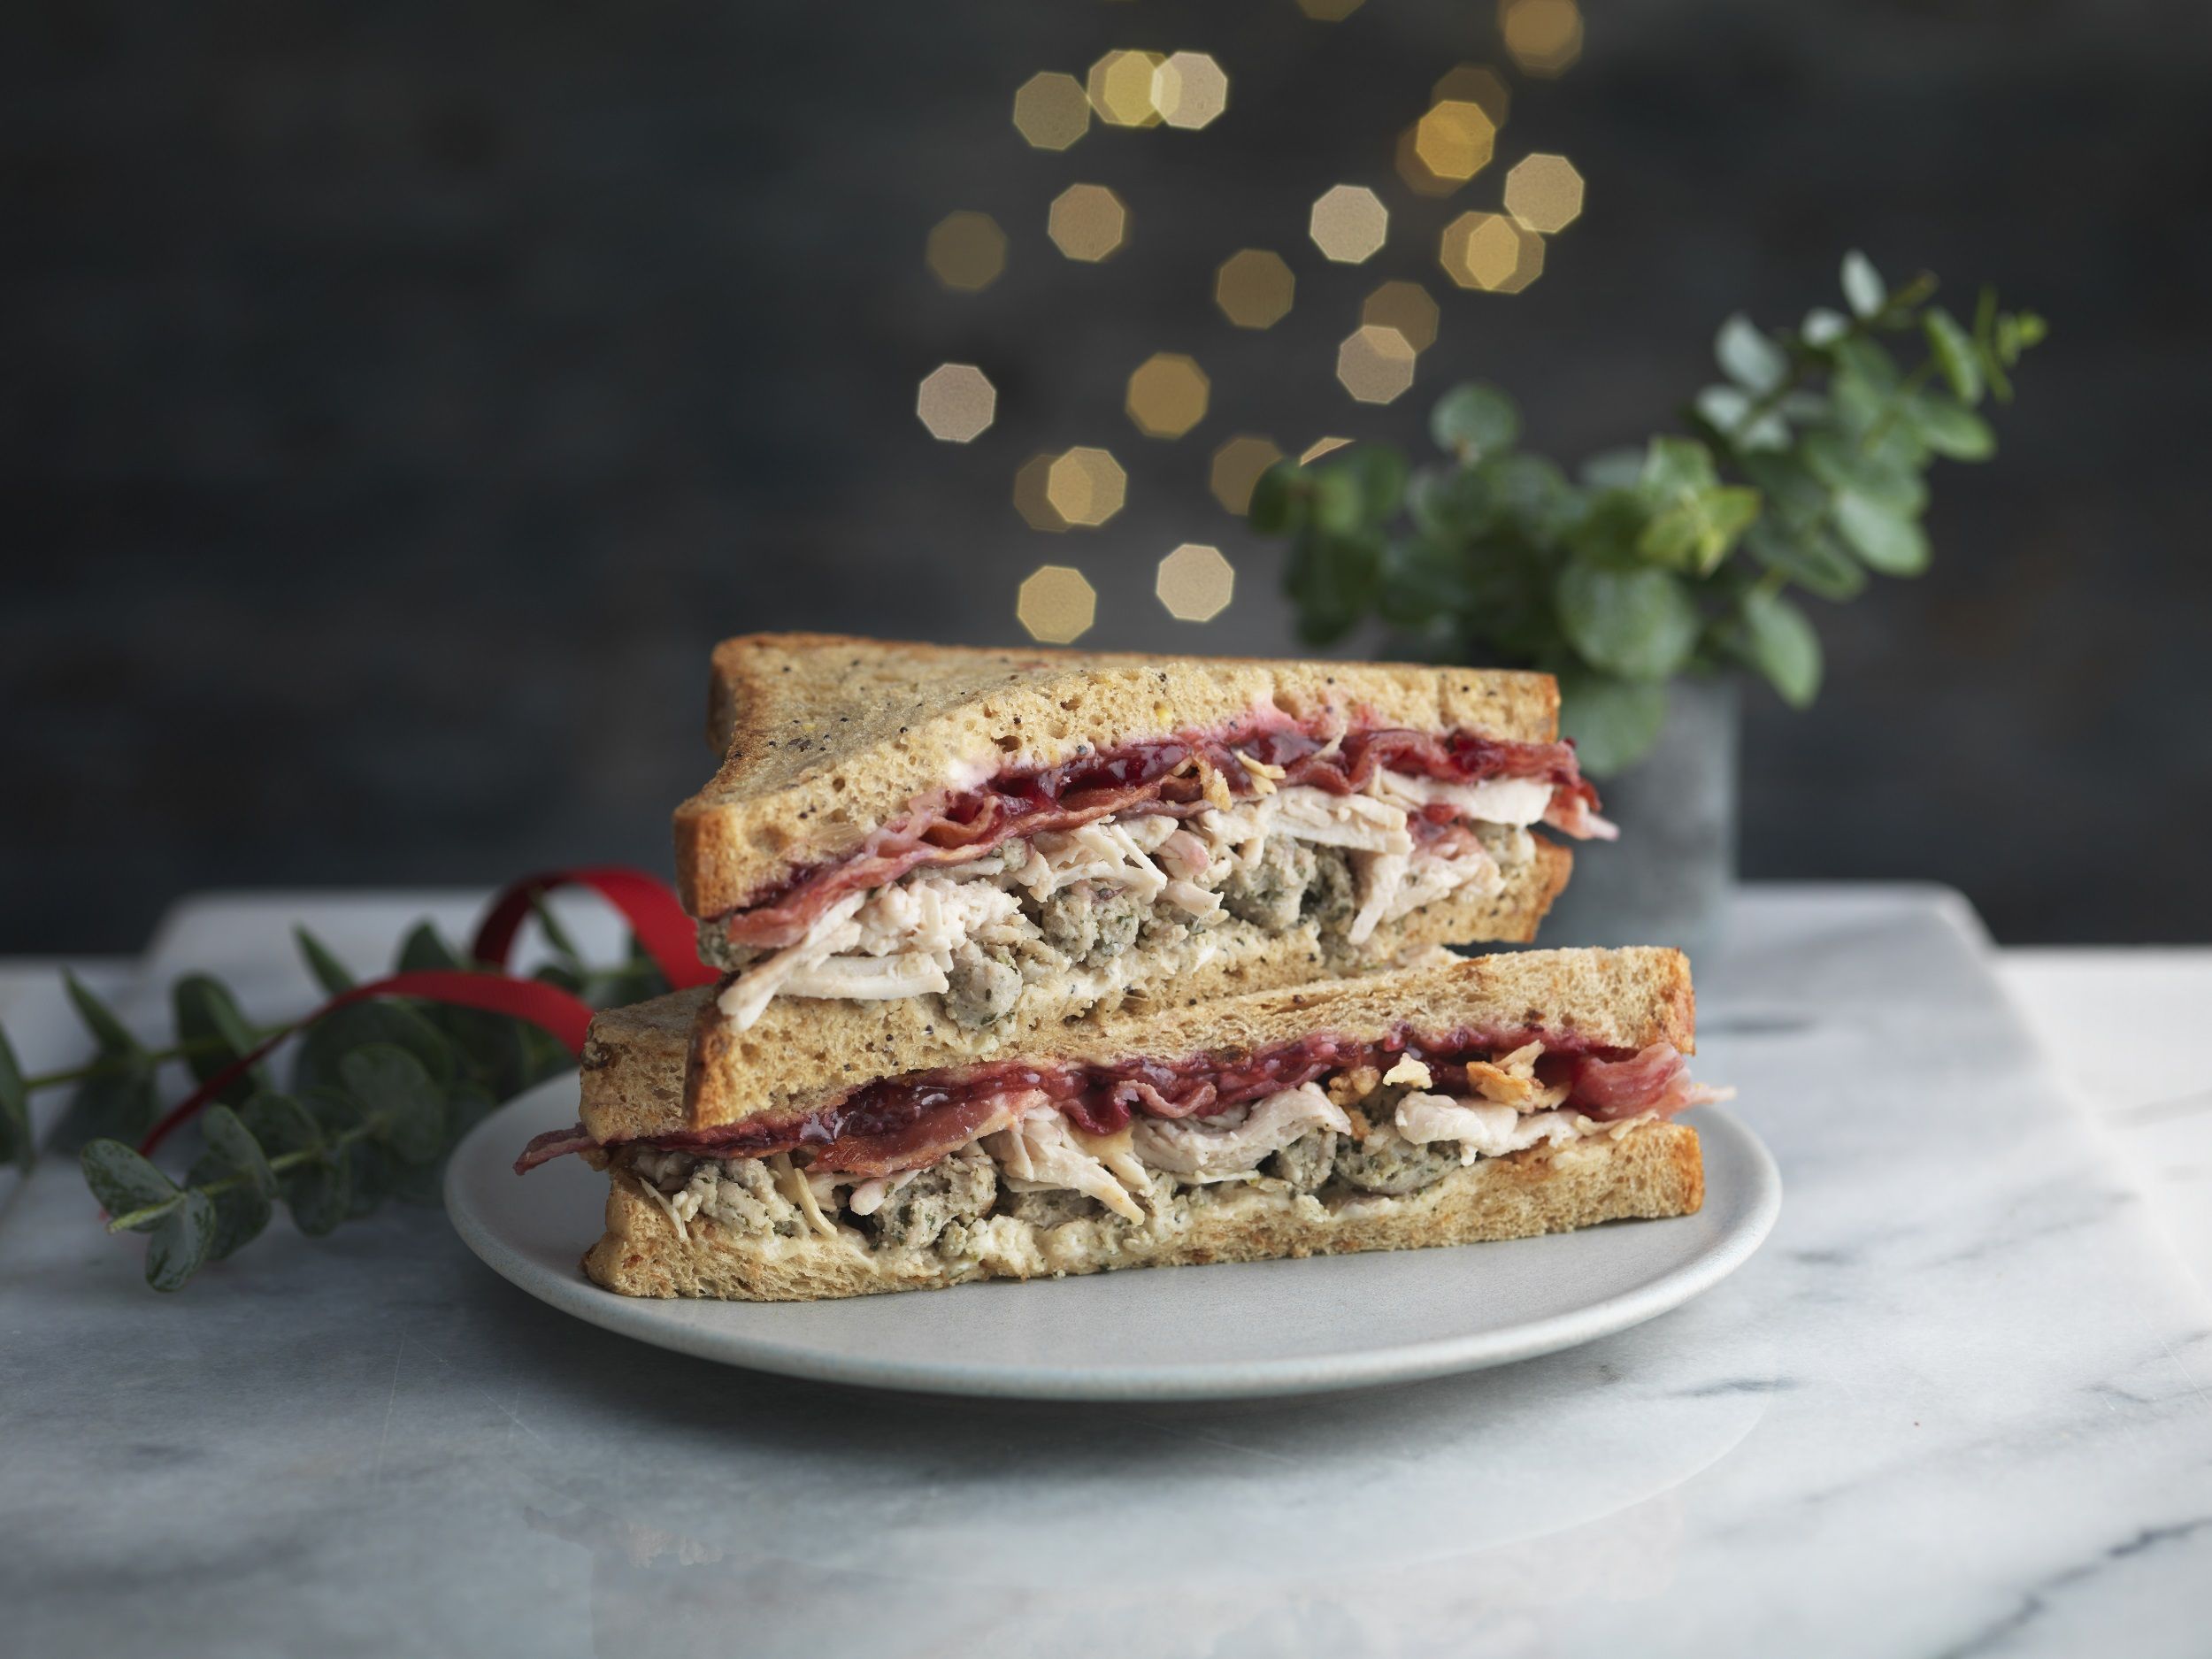 Verstikken Geslaagd Demon Play M&S has launched its Christmas sandwich collection for 2018